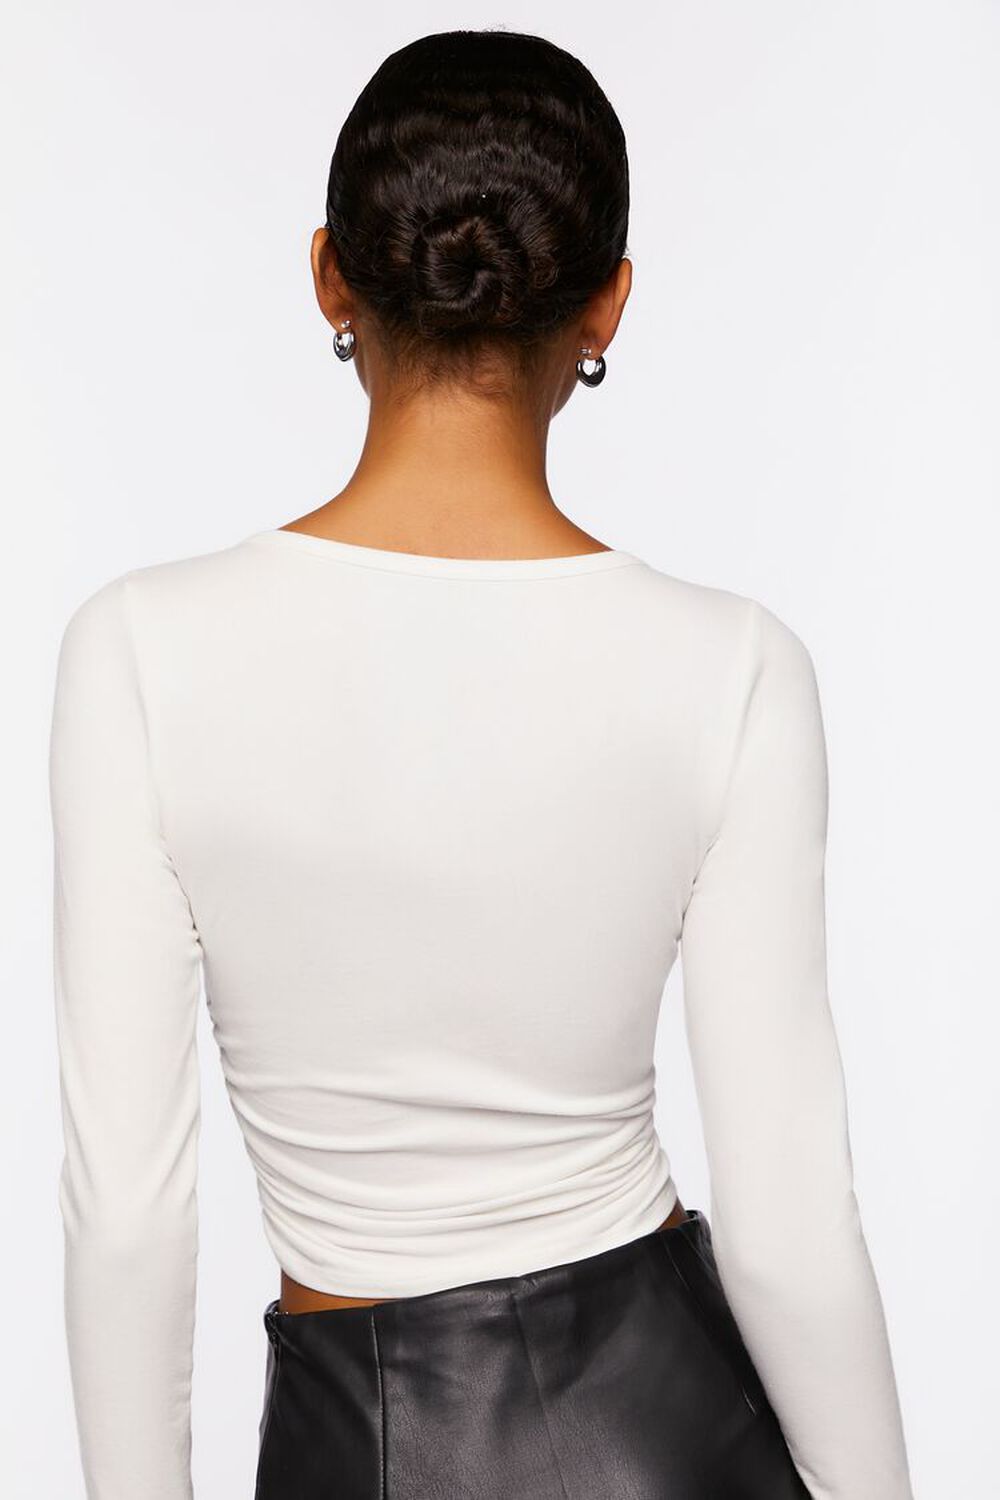 WHITE Ruched Long-Sleeve Tee, image 3